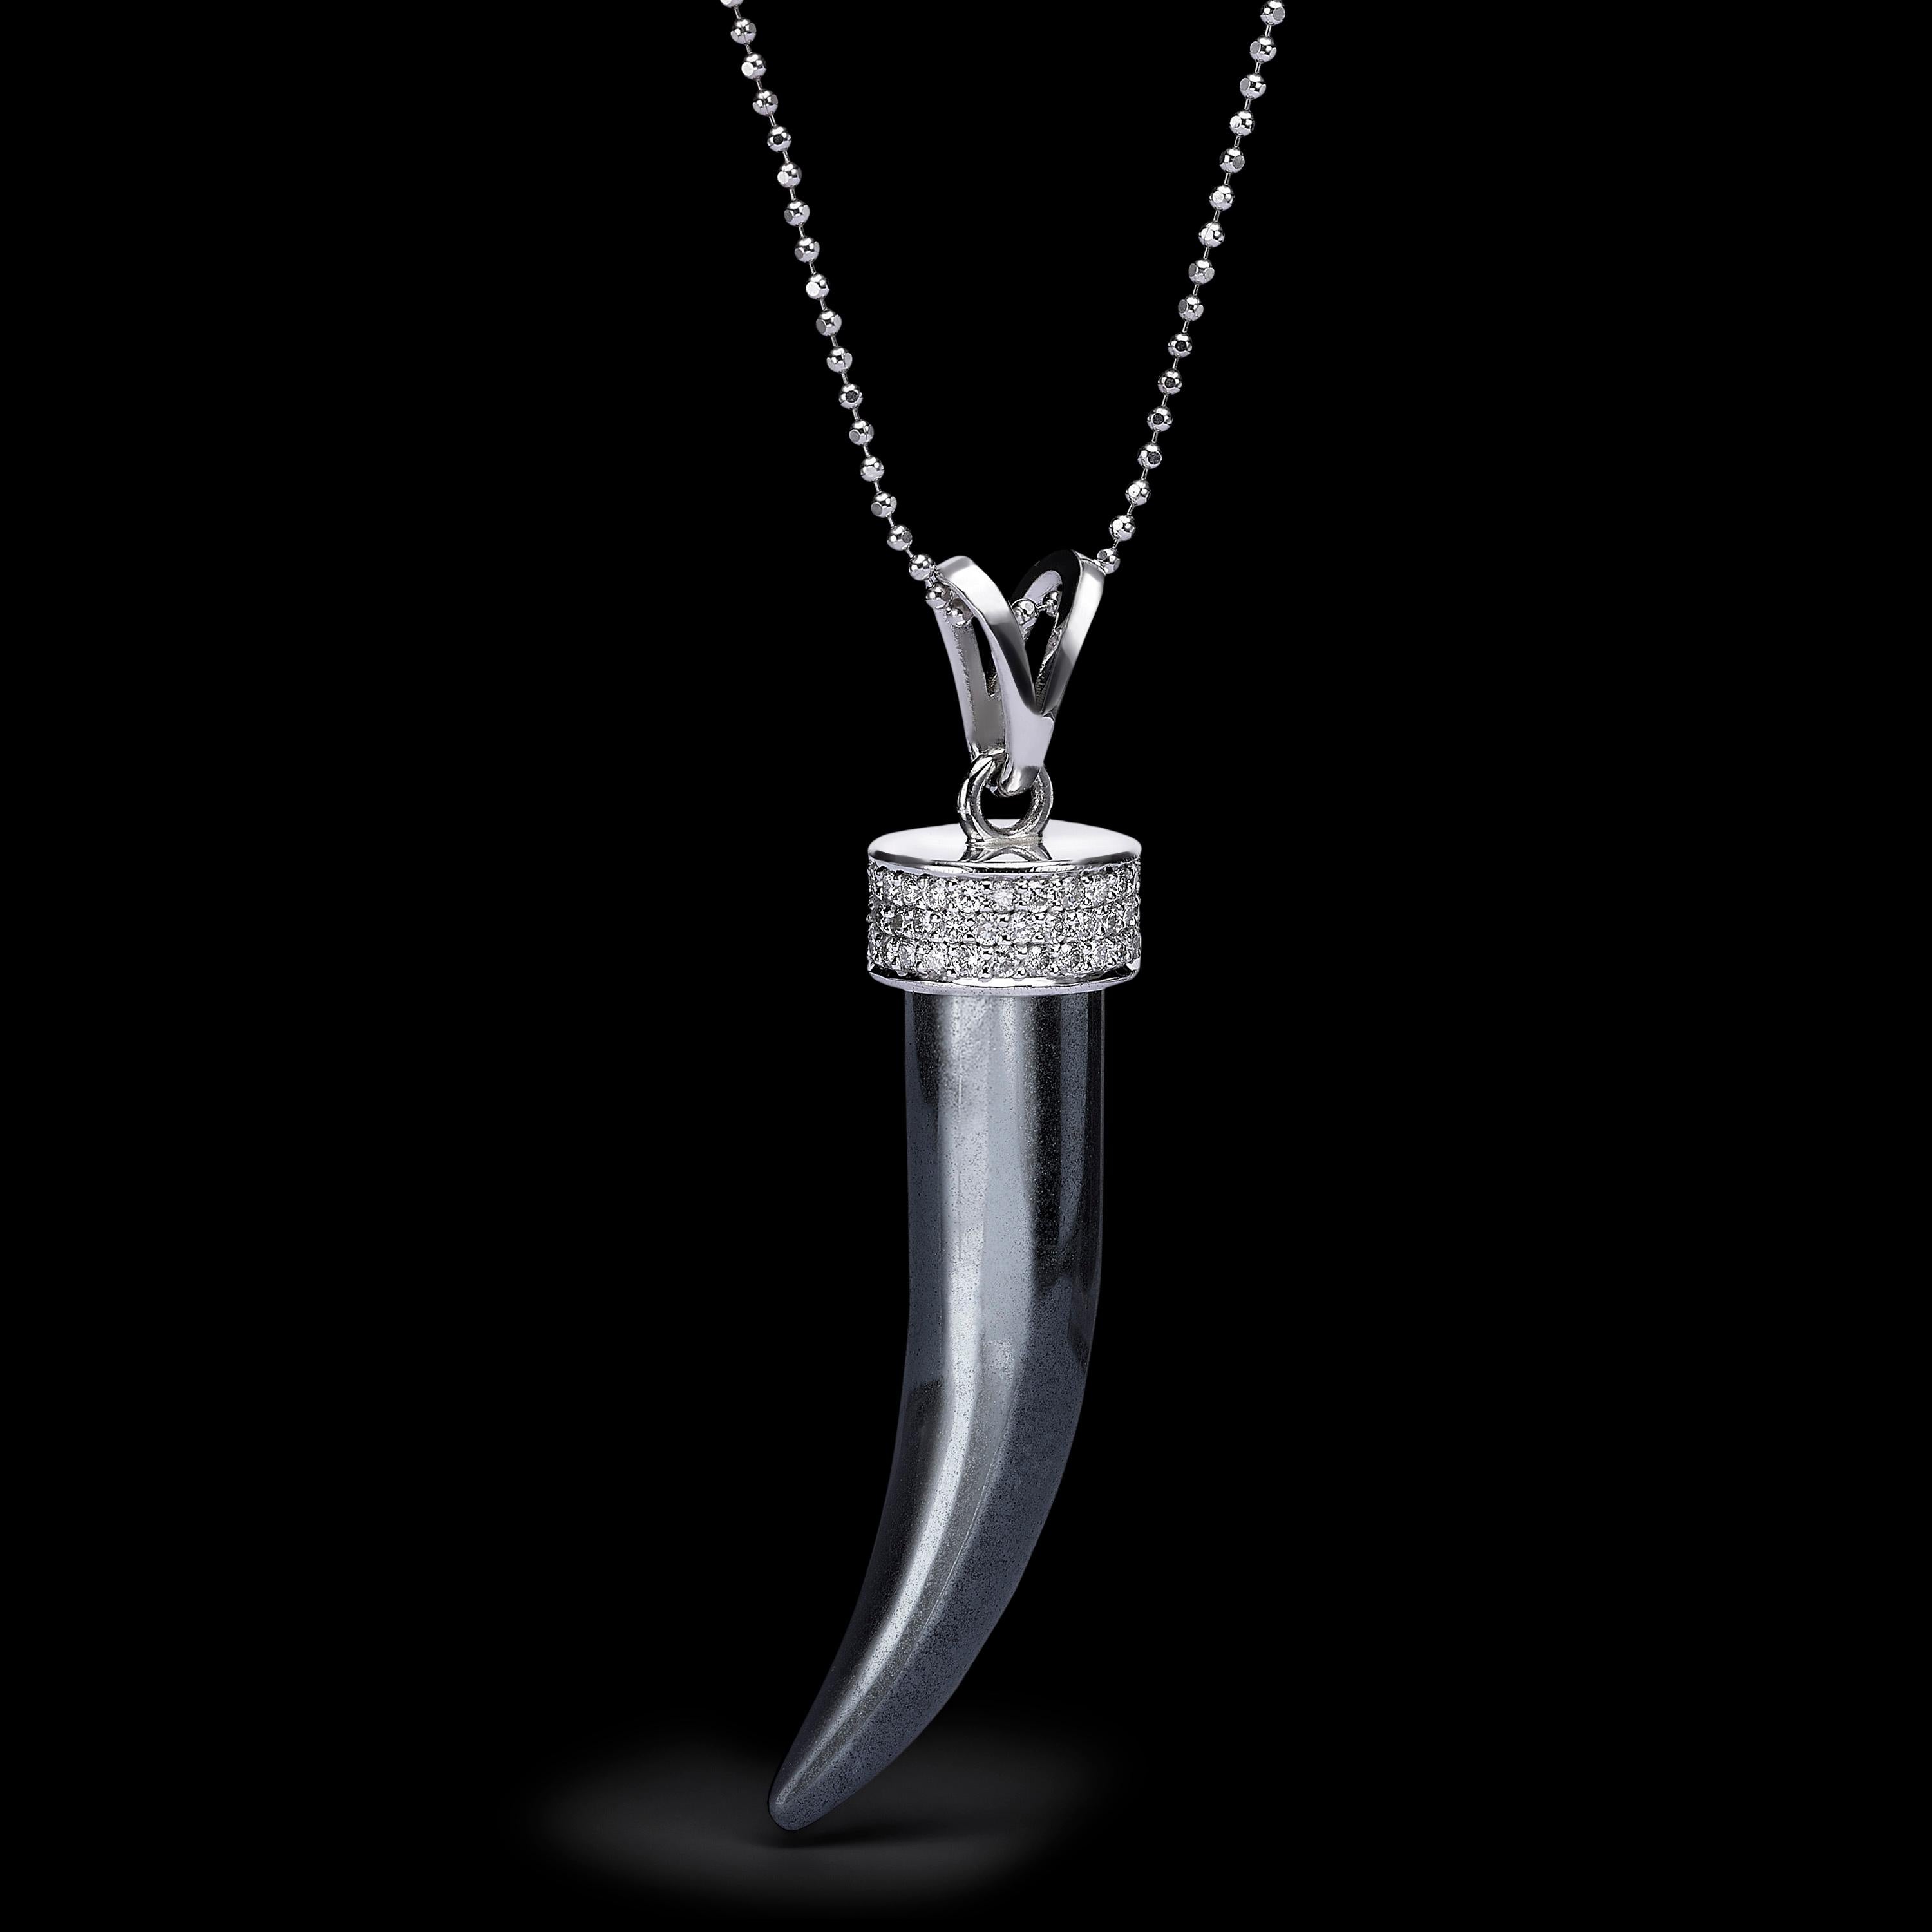 Hand Crafted unisex hematite horn spike pendant is set with 75 round brilliant cut diamonds on 14K white gold.
Hematite guides and protects you during your spiritual journey and brings balance to your life.
Our beautiful pendant includes a 22 inch